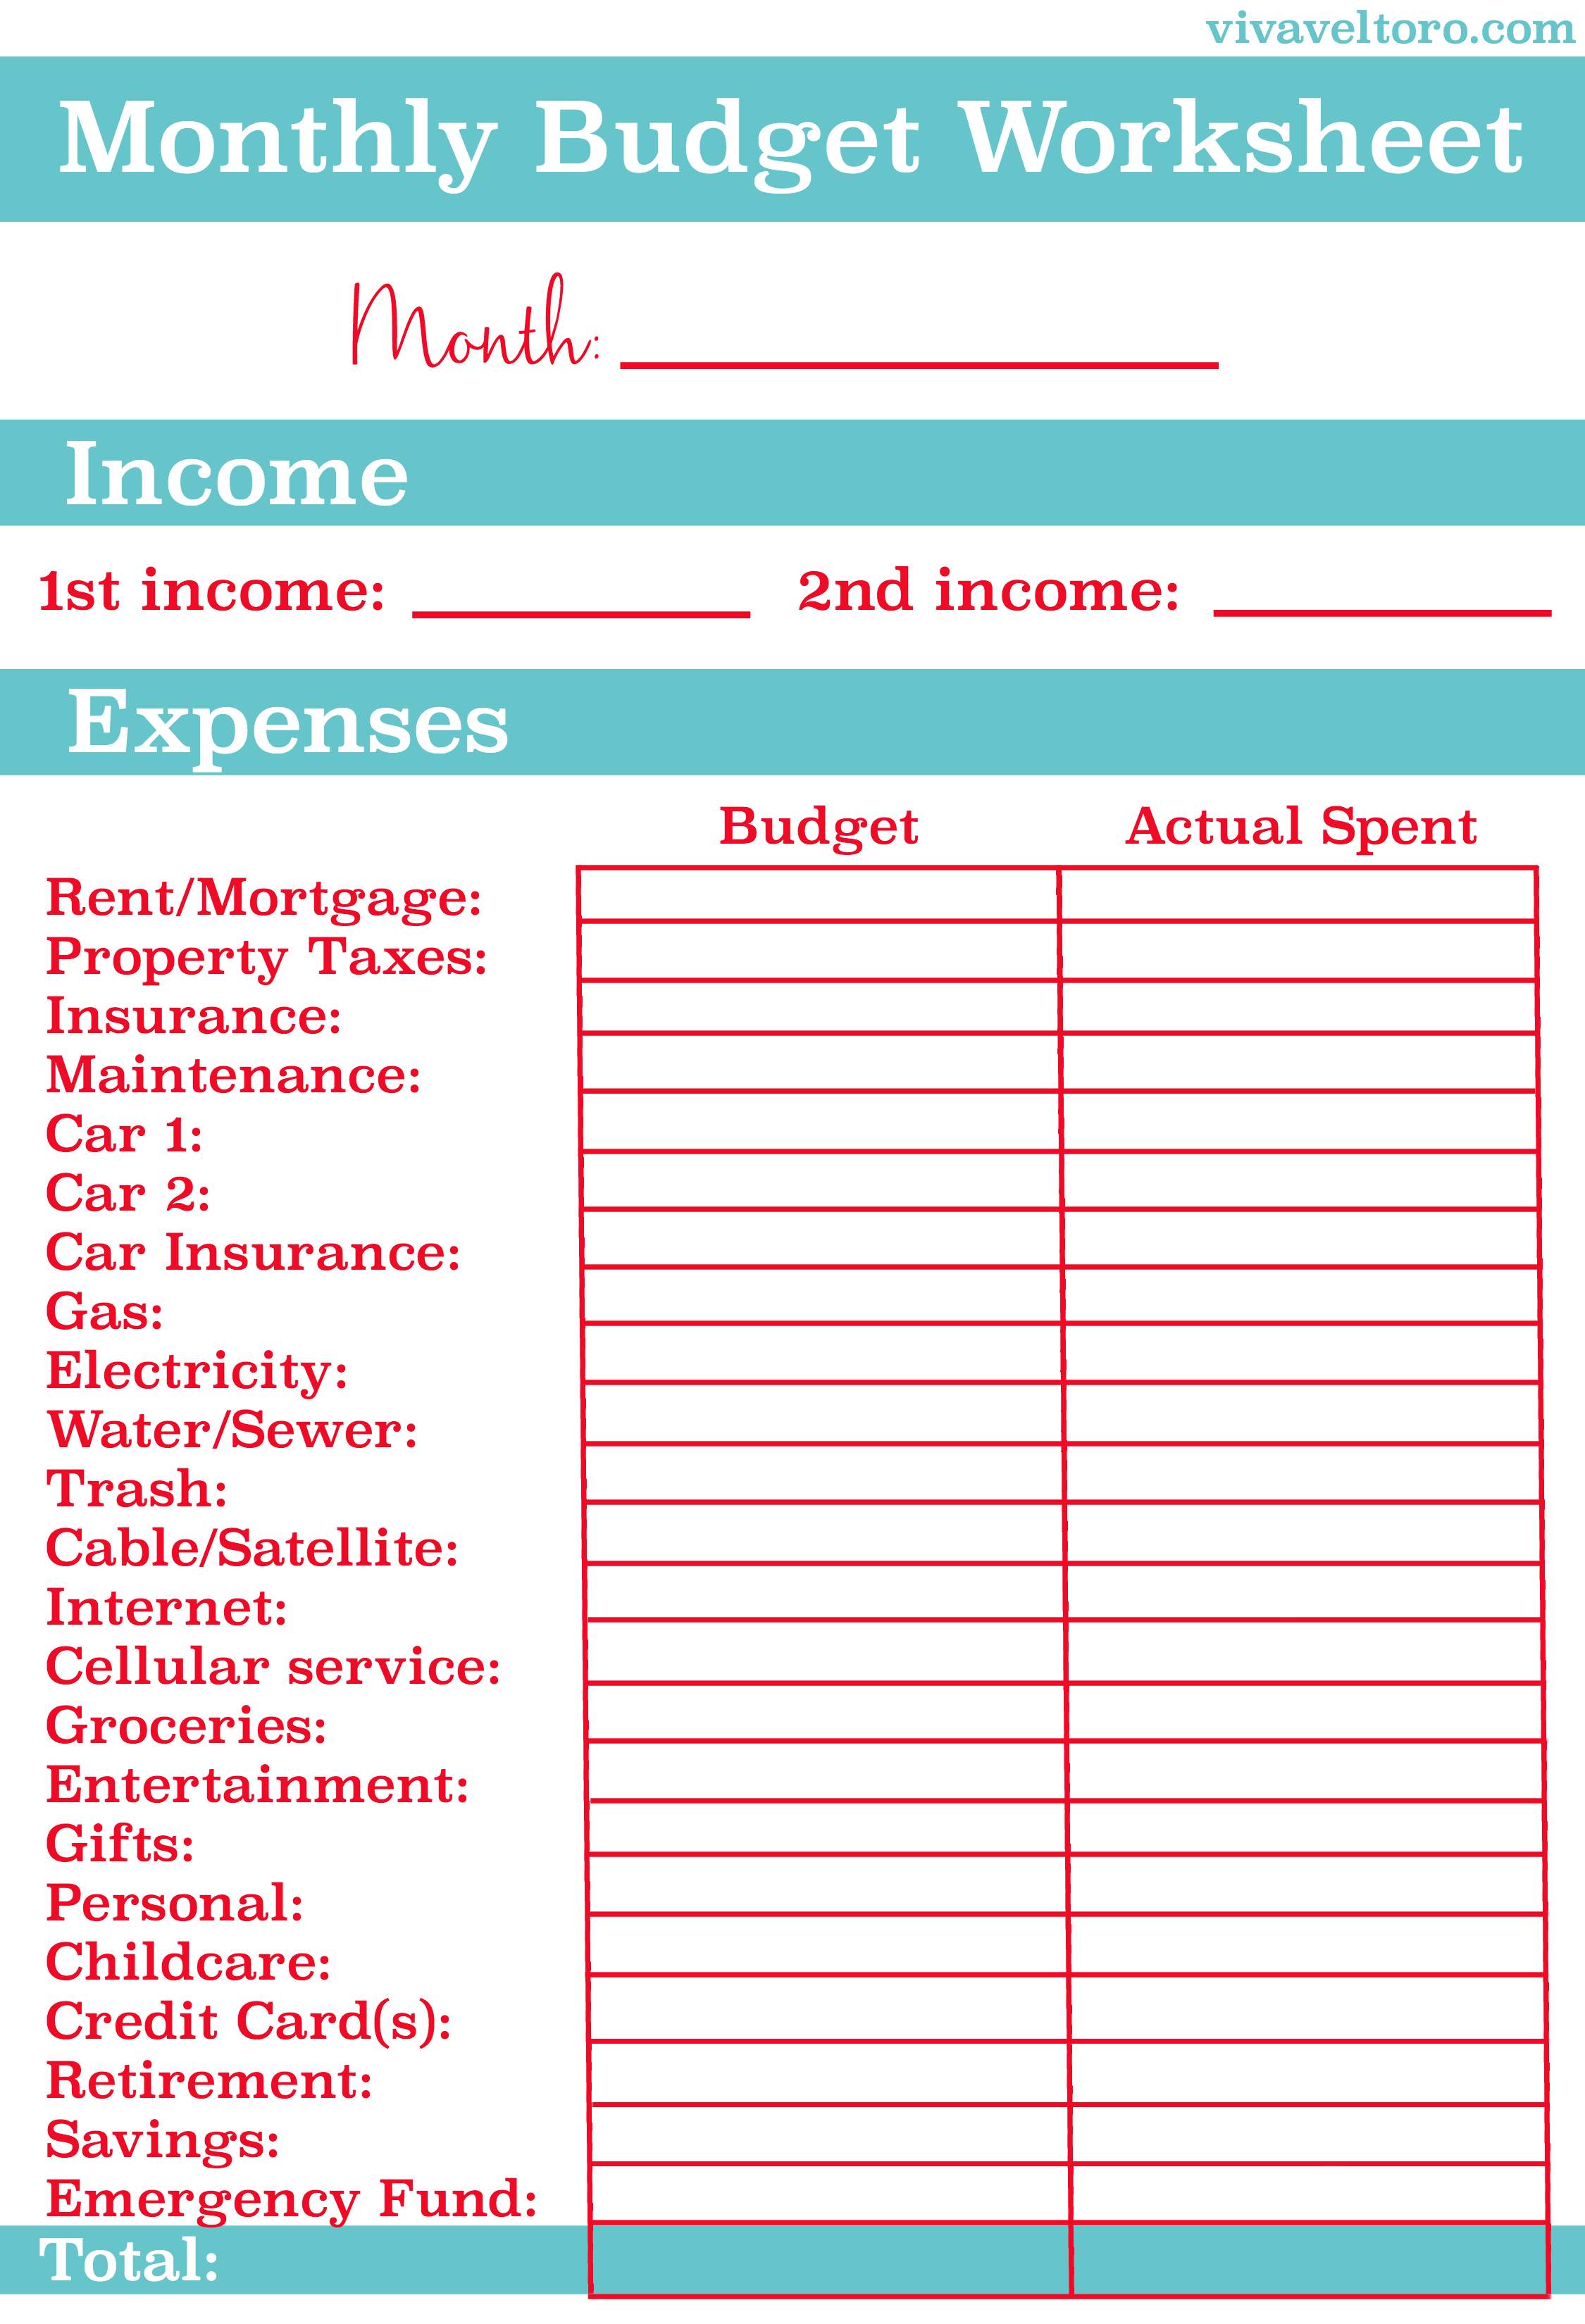 Basic Budget Worksheet For Young Adults Db excel